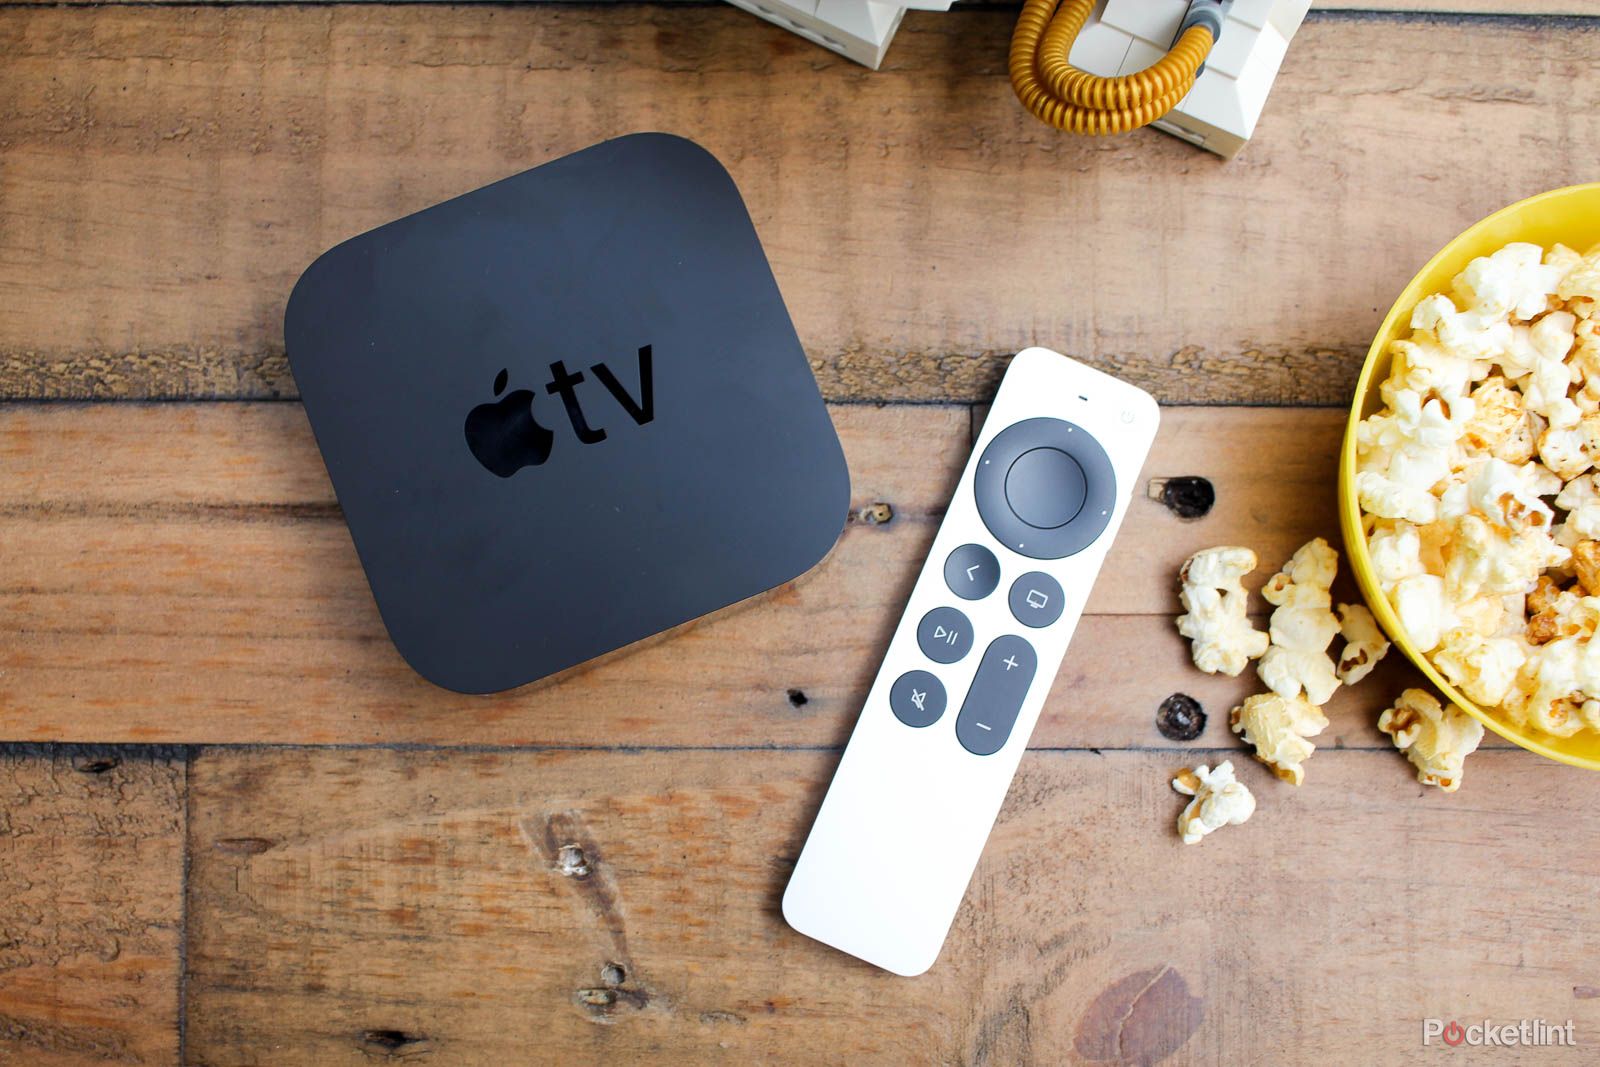 Apple TV and remote on wood table with popcorn